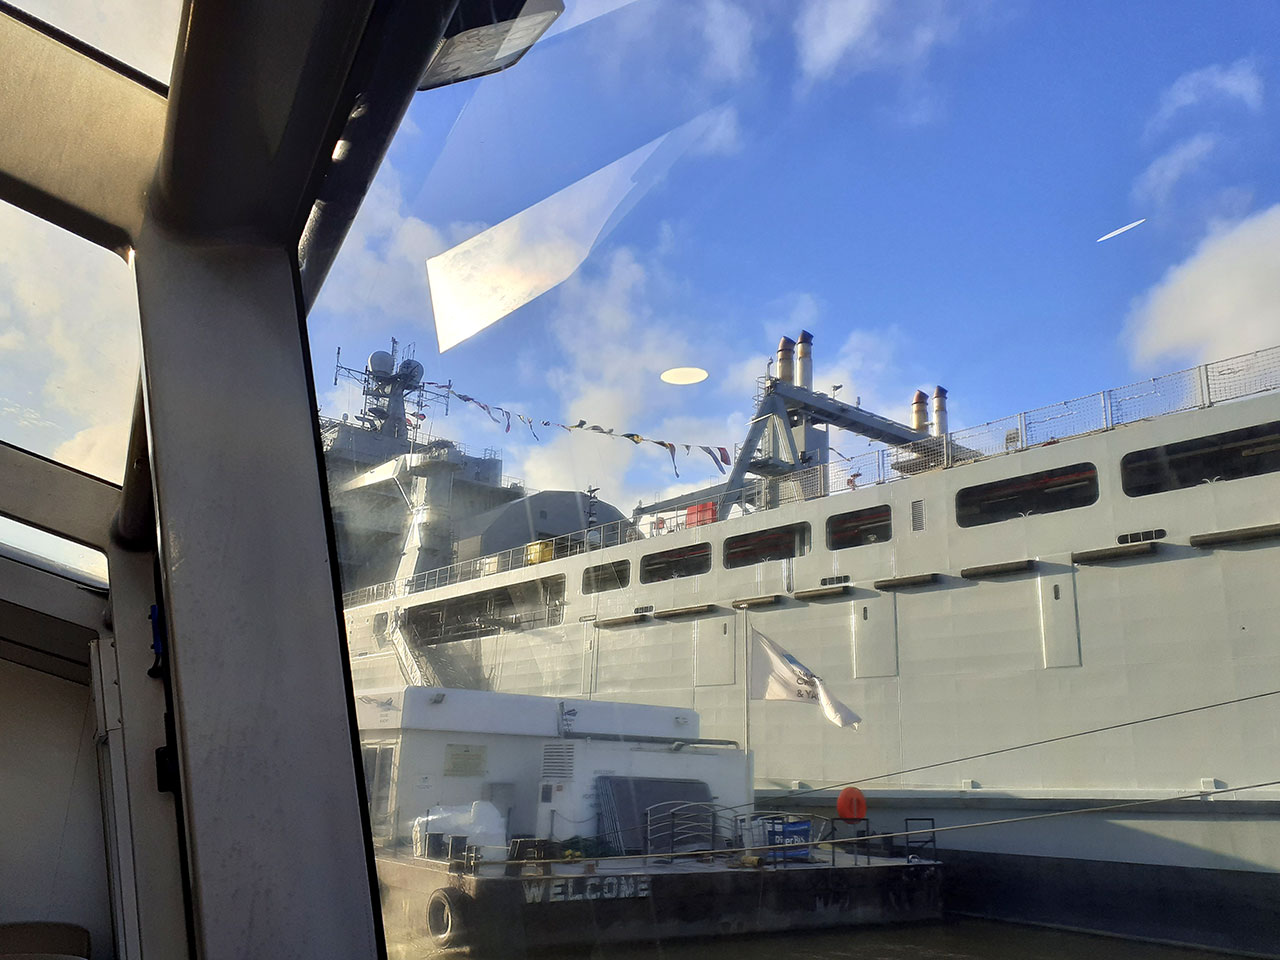 RFA Lyme Bay maritime expo with the DfT